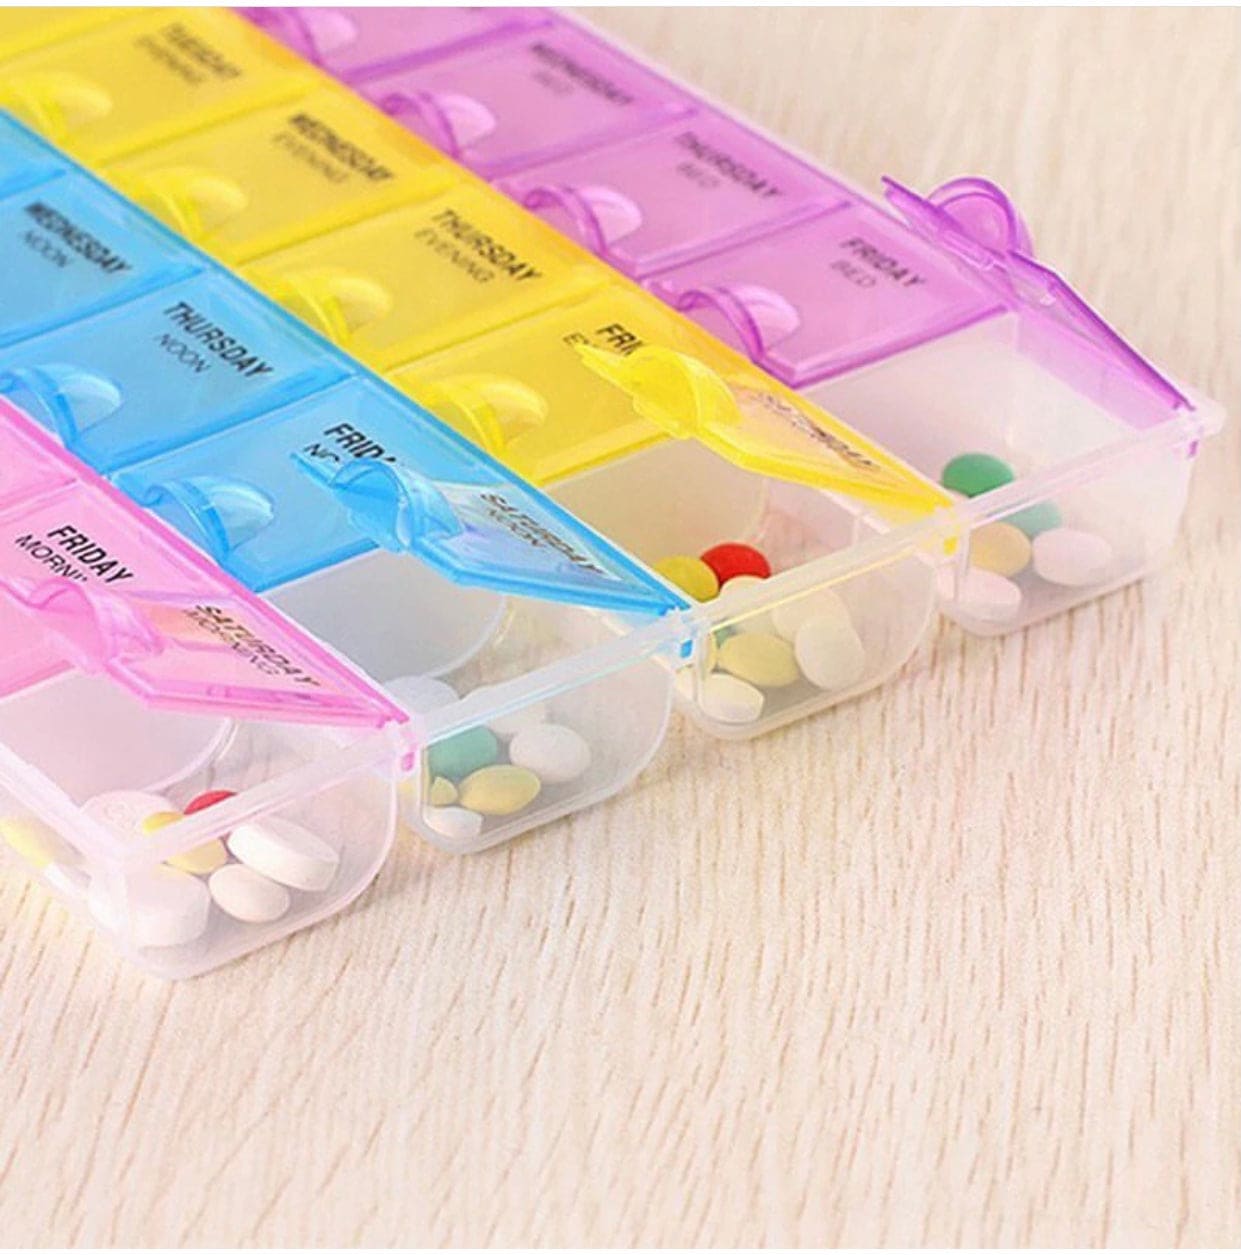 Portable Medicine Storage Organizer, Outdoor Travel Pill Protect Container, Splitters Pill Case Holder, Weekly Portable Medicine Storage Container